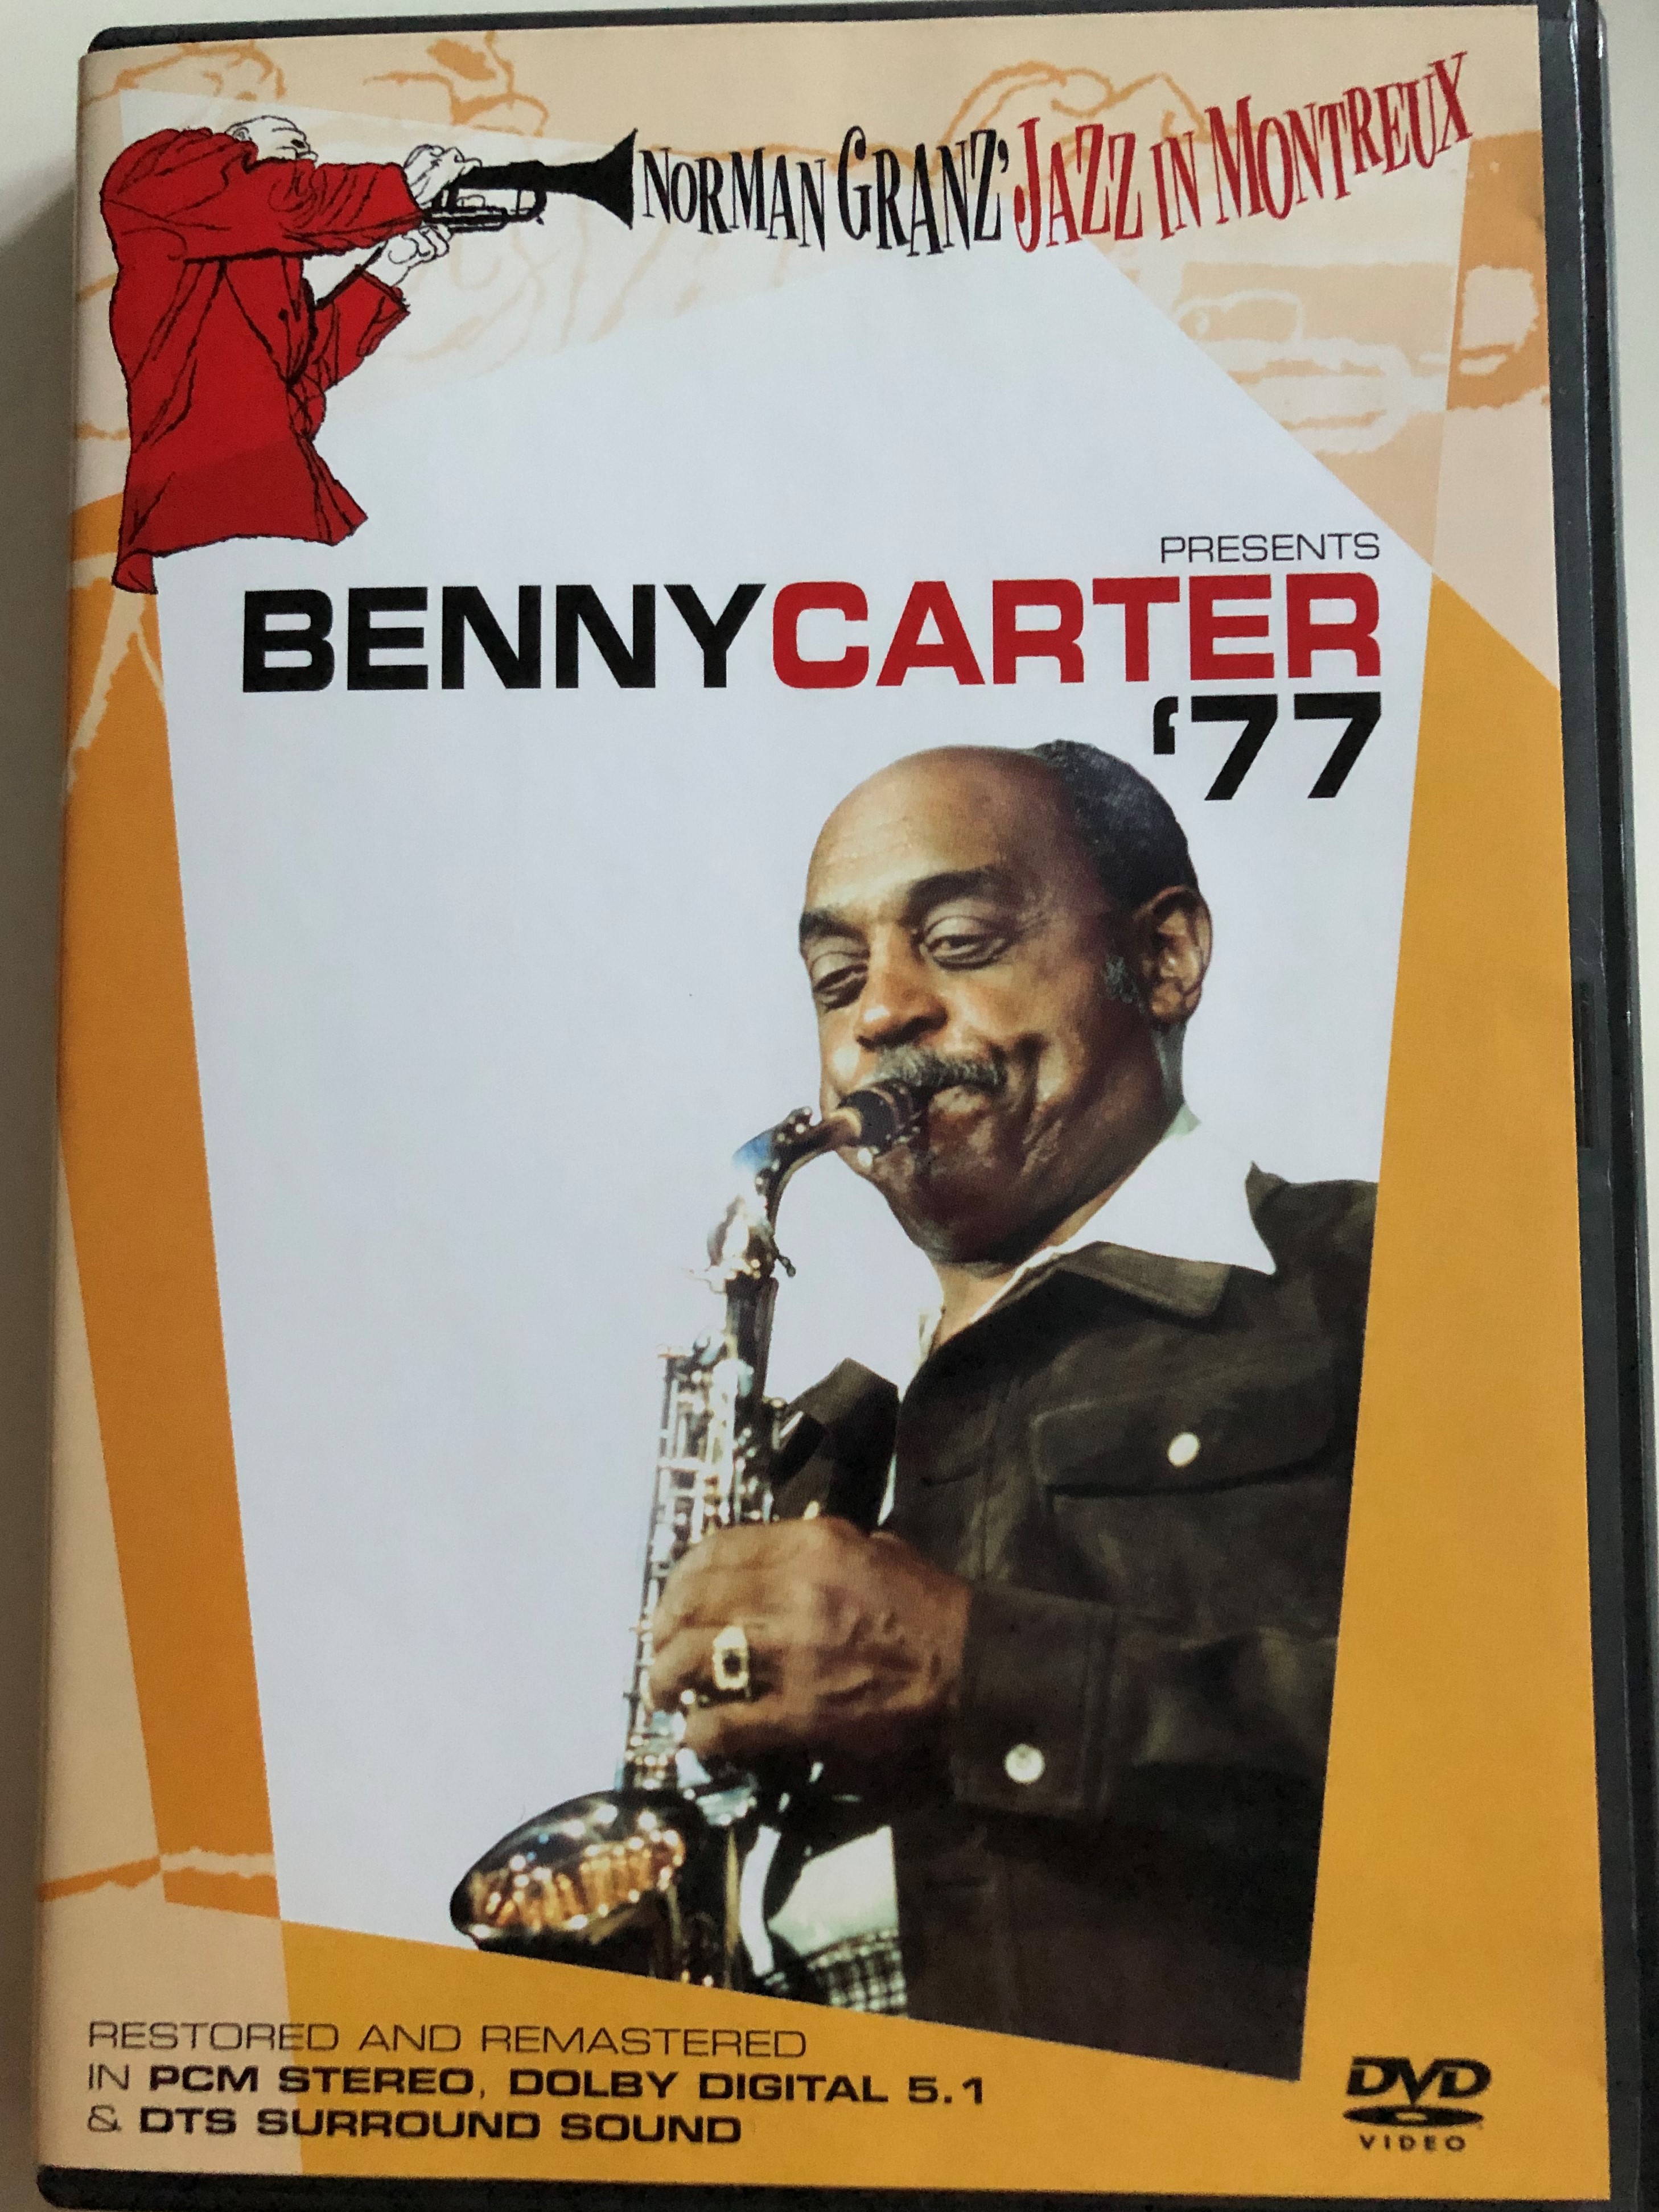 benny-carter-77-dvd-2004-norman-granz-jazz-in-montreux-three-little-words-in-a-mellow-tone-body-soul-here-s-that-rainy-day-restored-and-remastered-in-dolby-digital-5.1-dts-surround-1-.jpg